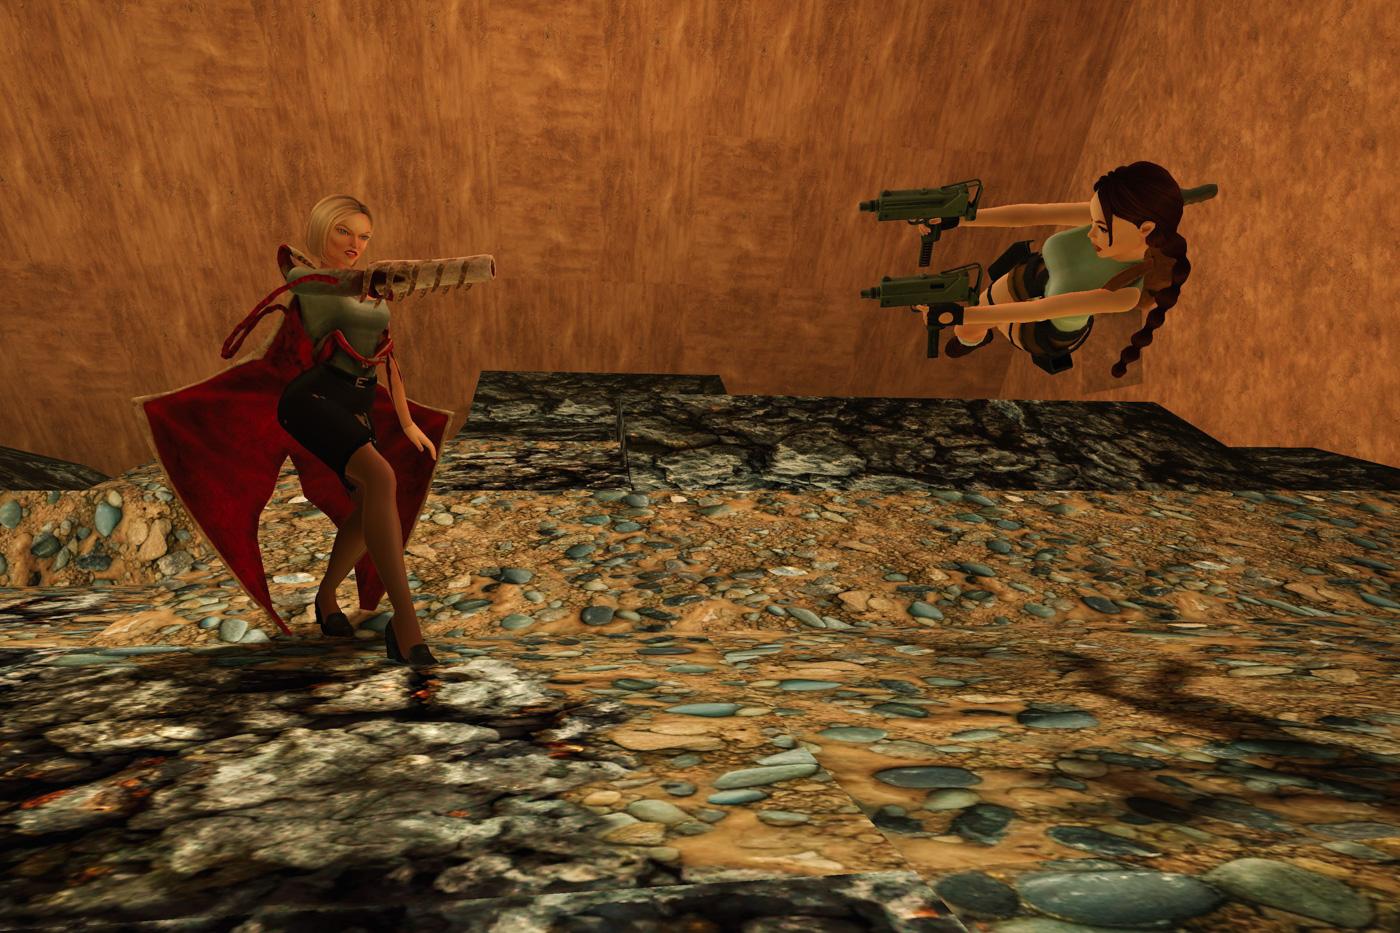 Natla and Lara facing their weapons at each other.